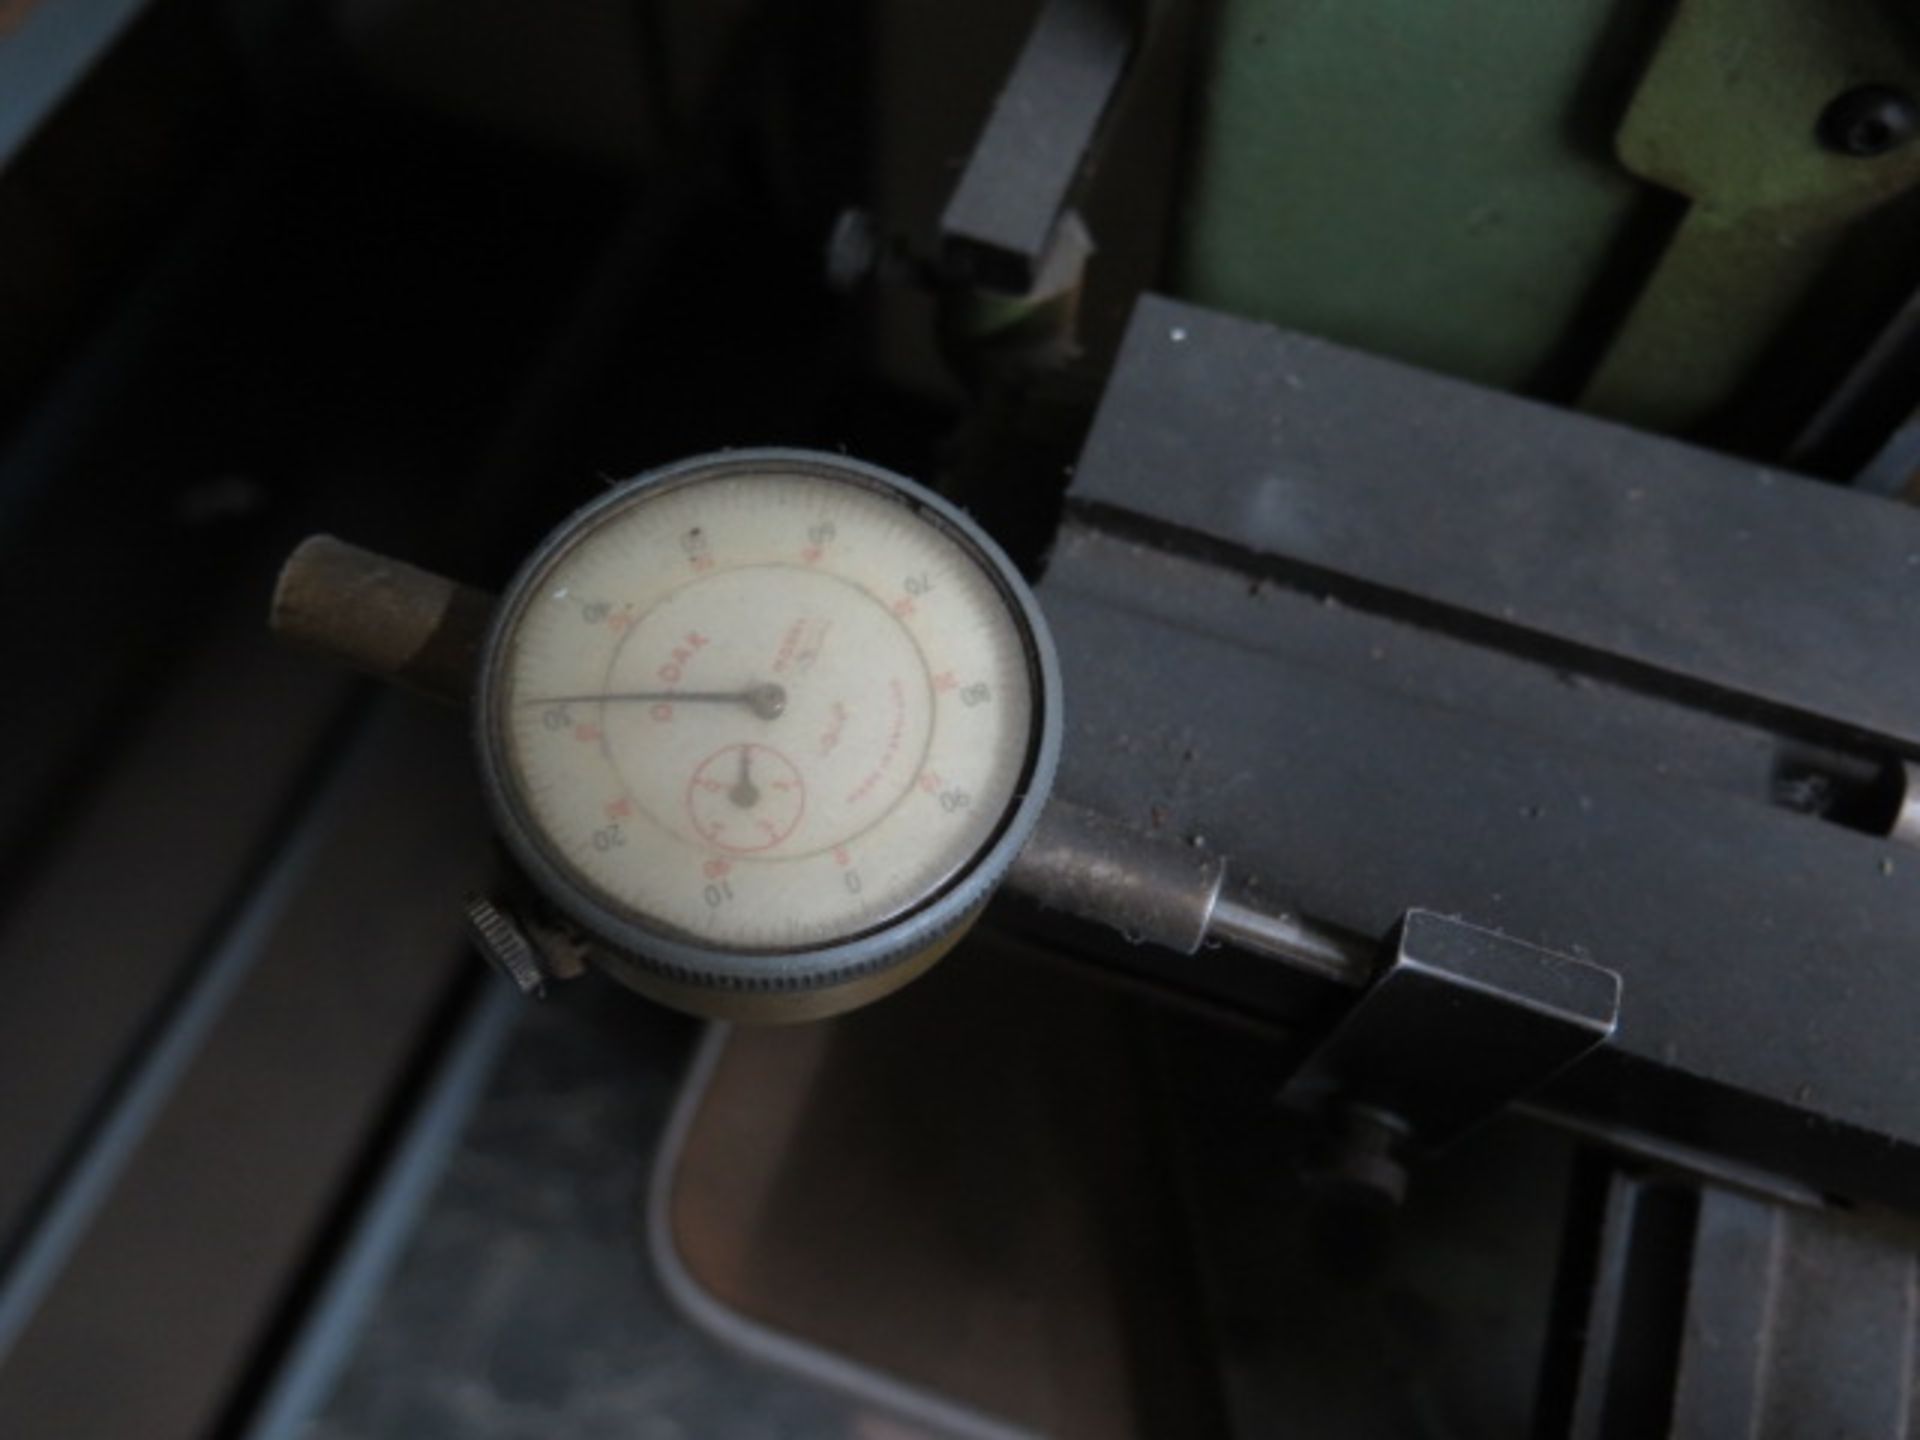 Pacific Gage mdl. 100 9" Optical Comparator (BROKEN LENS) (SOLD AS-IS - NO WARRANTY) - Image 5 of 7